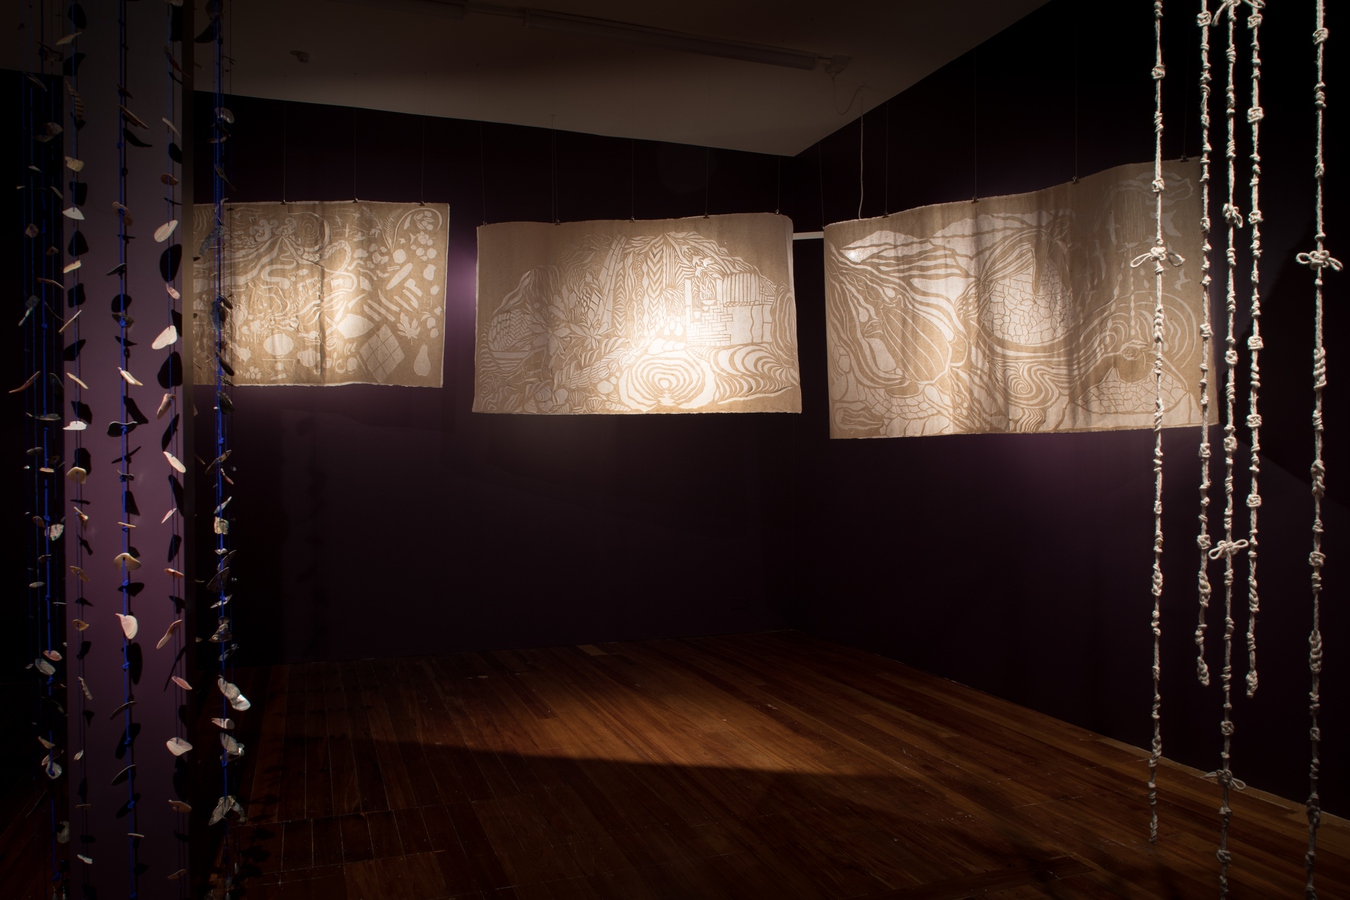 Image: Tessa Ma’auga, Longing for homeland (installation view), 2022. Photo: Janneth Gil.